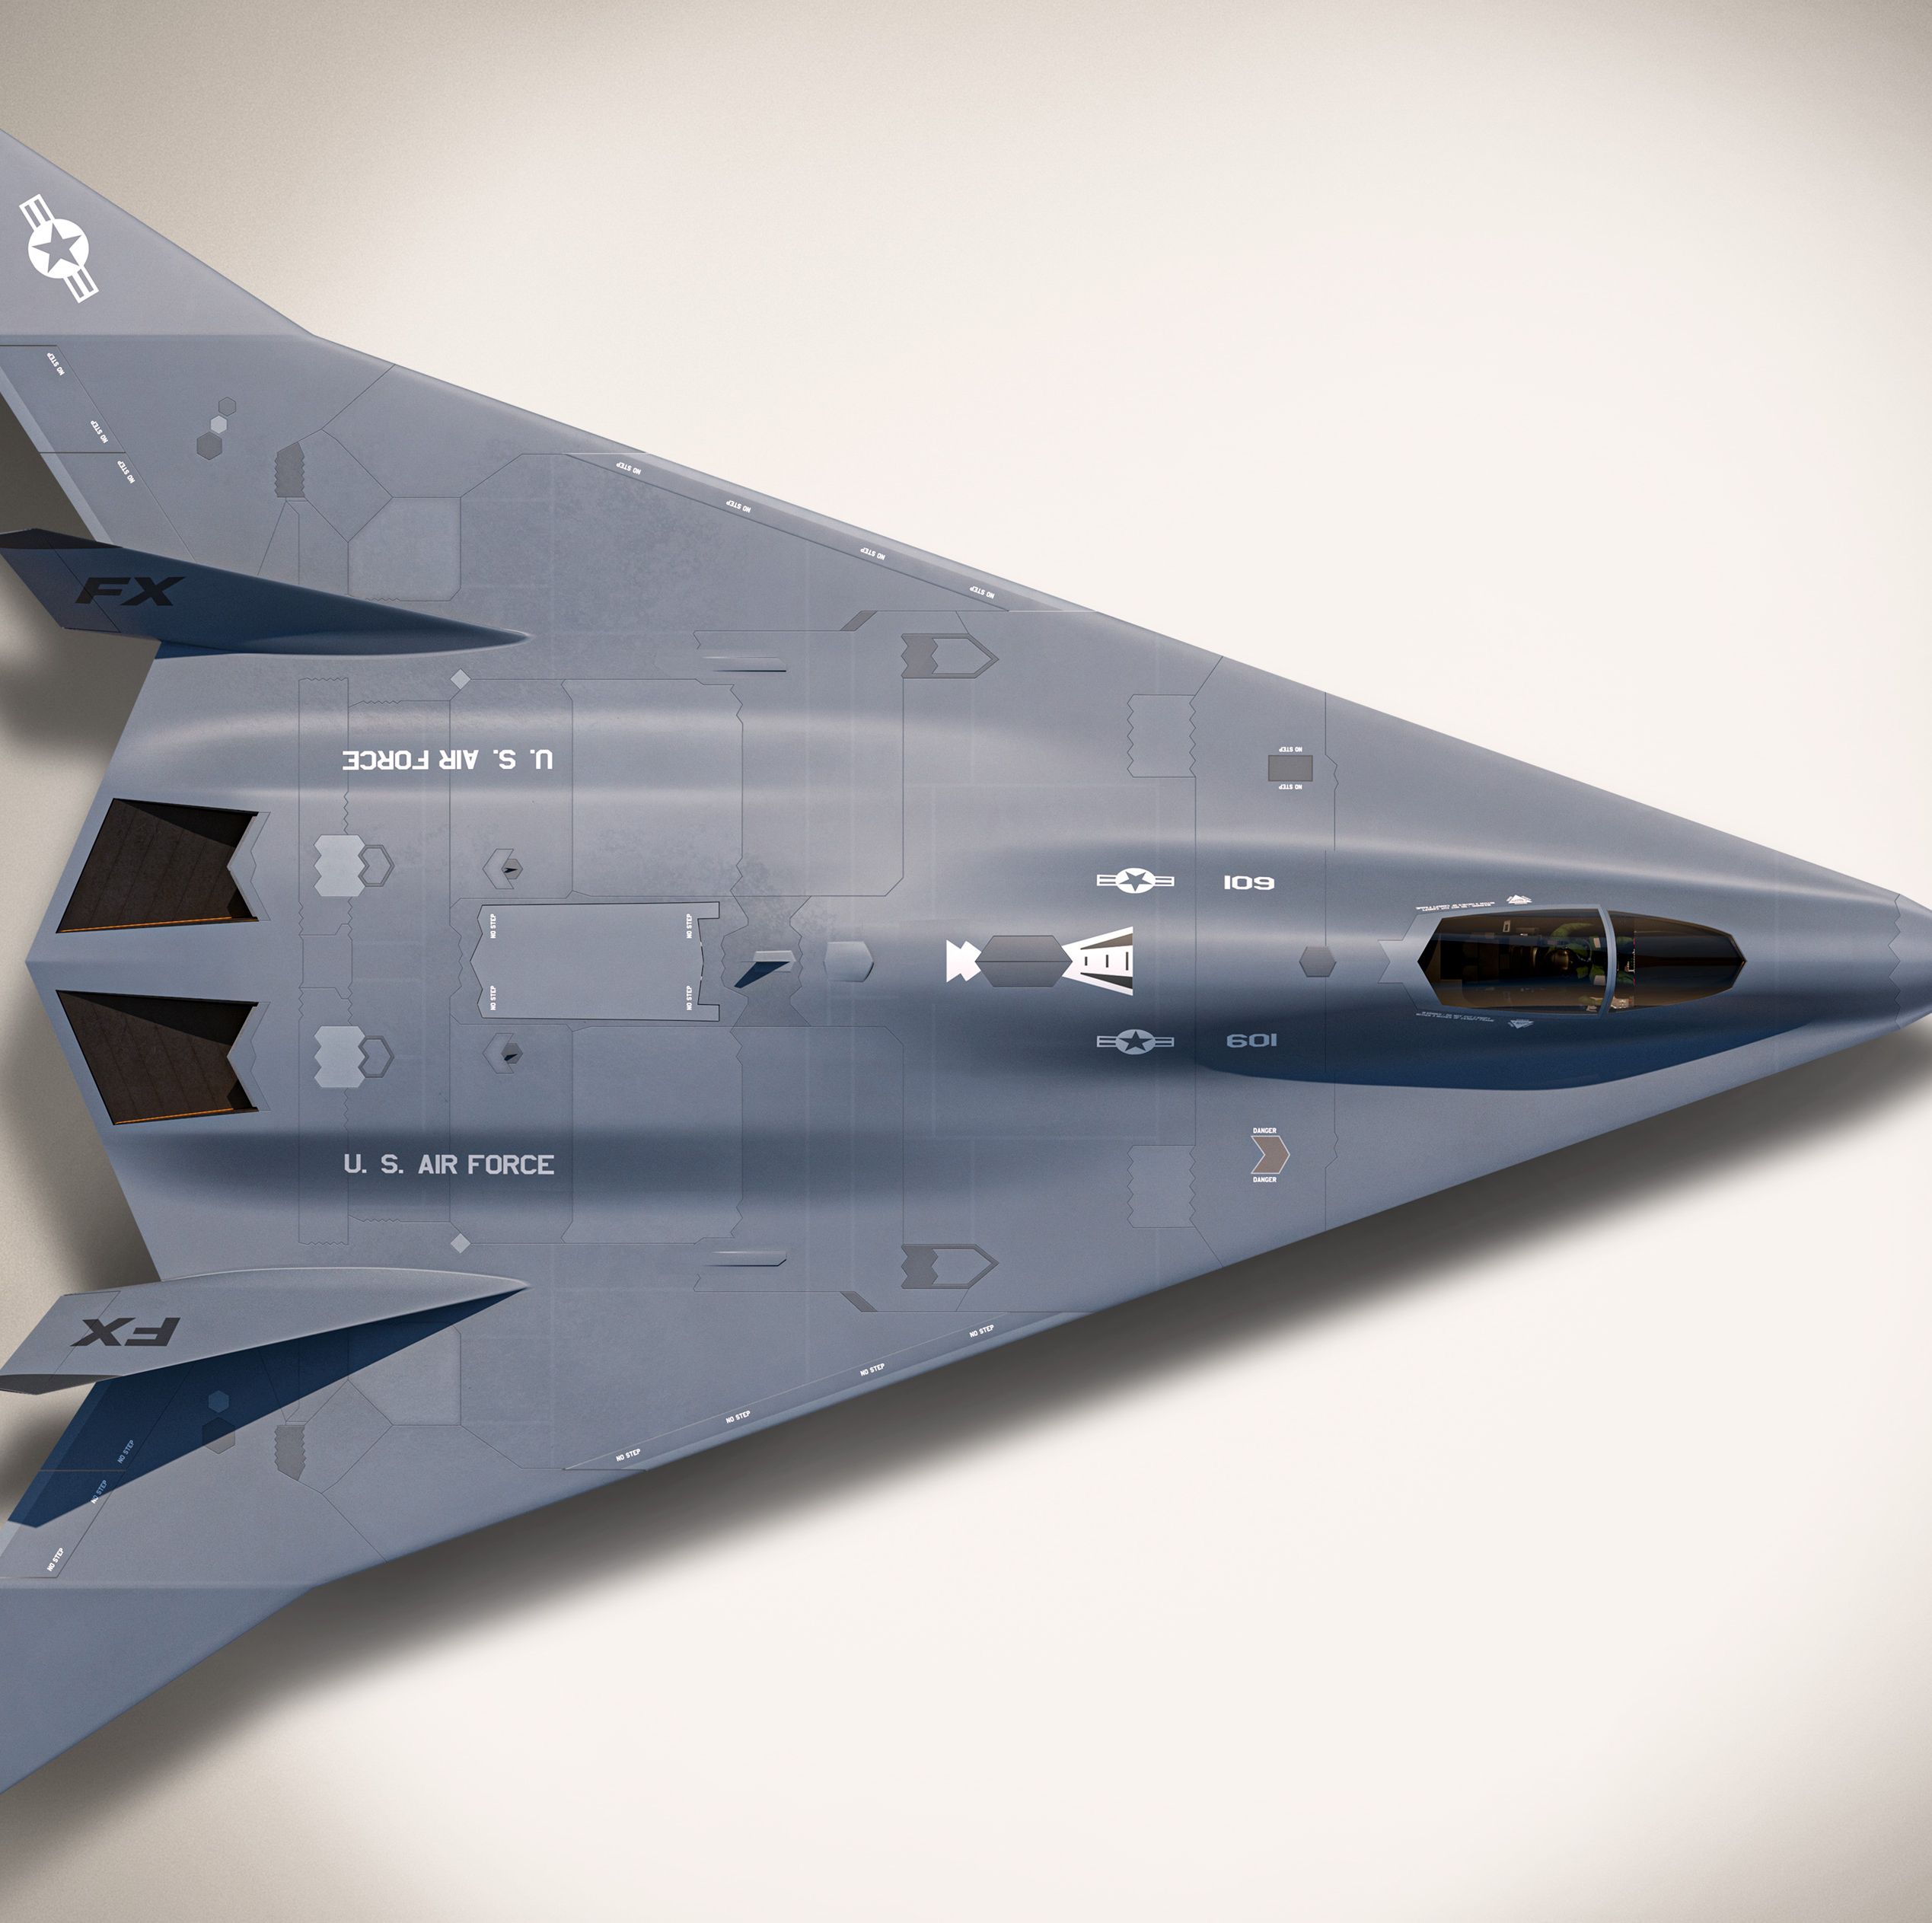 America's Next Stealth Fighter Will Rule the Skies